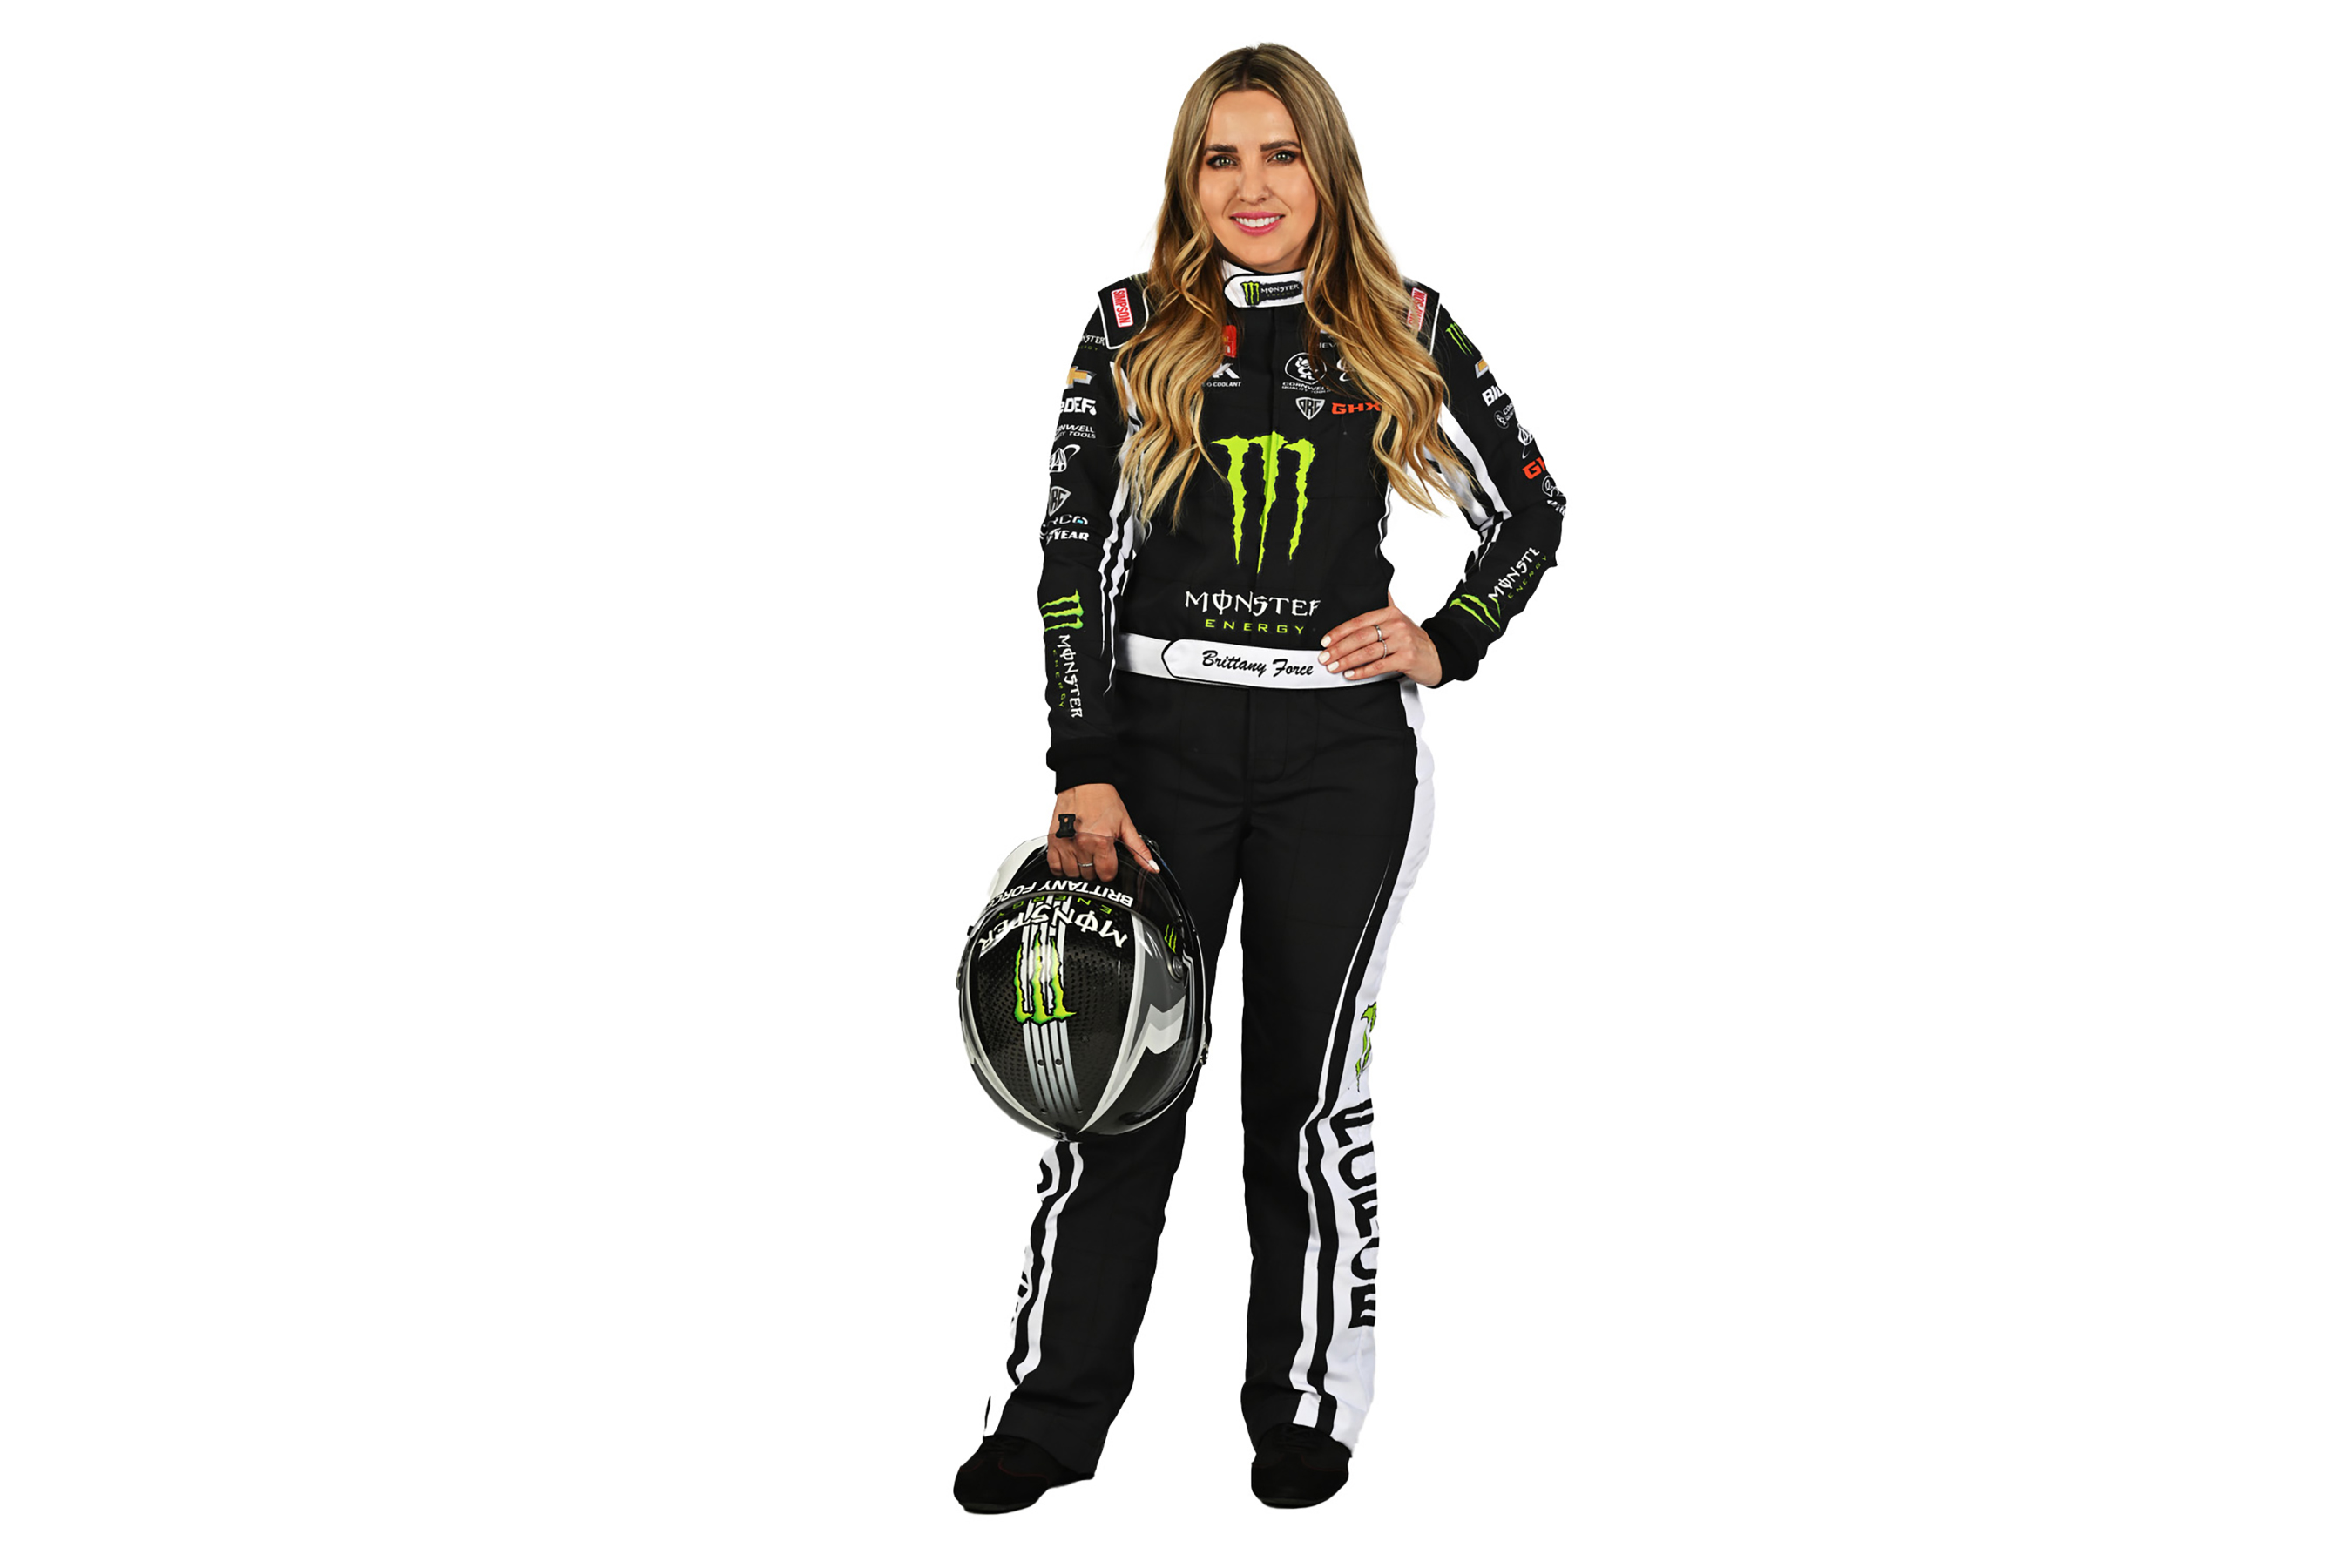 Monster Energy Roars into 2024 NHRA Top Fuel Series Supporting Champion Brittany Force